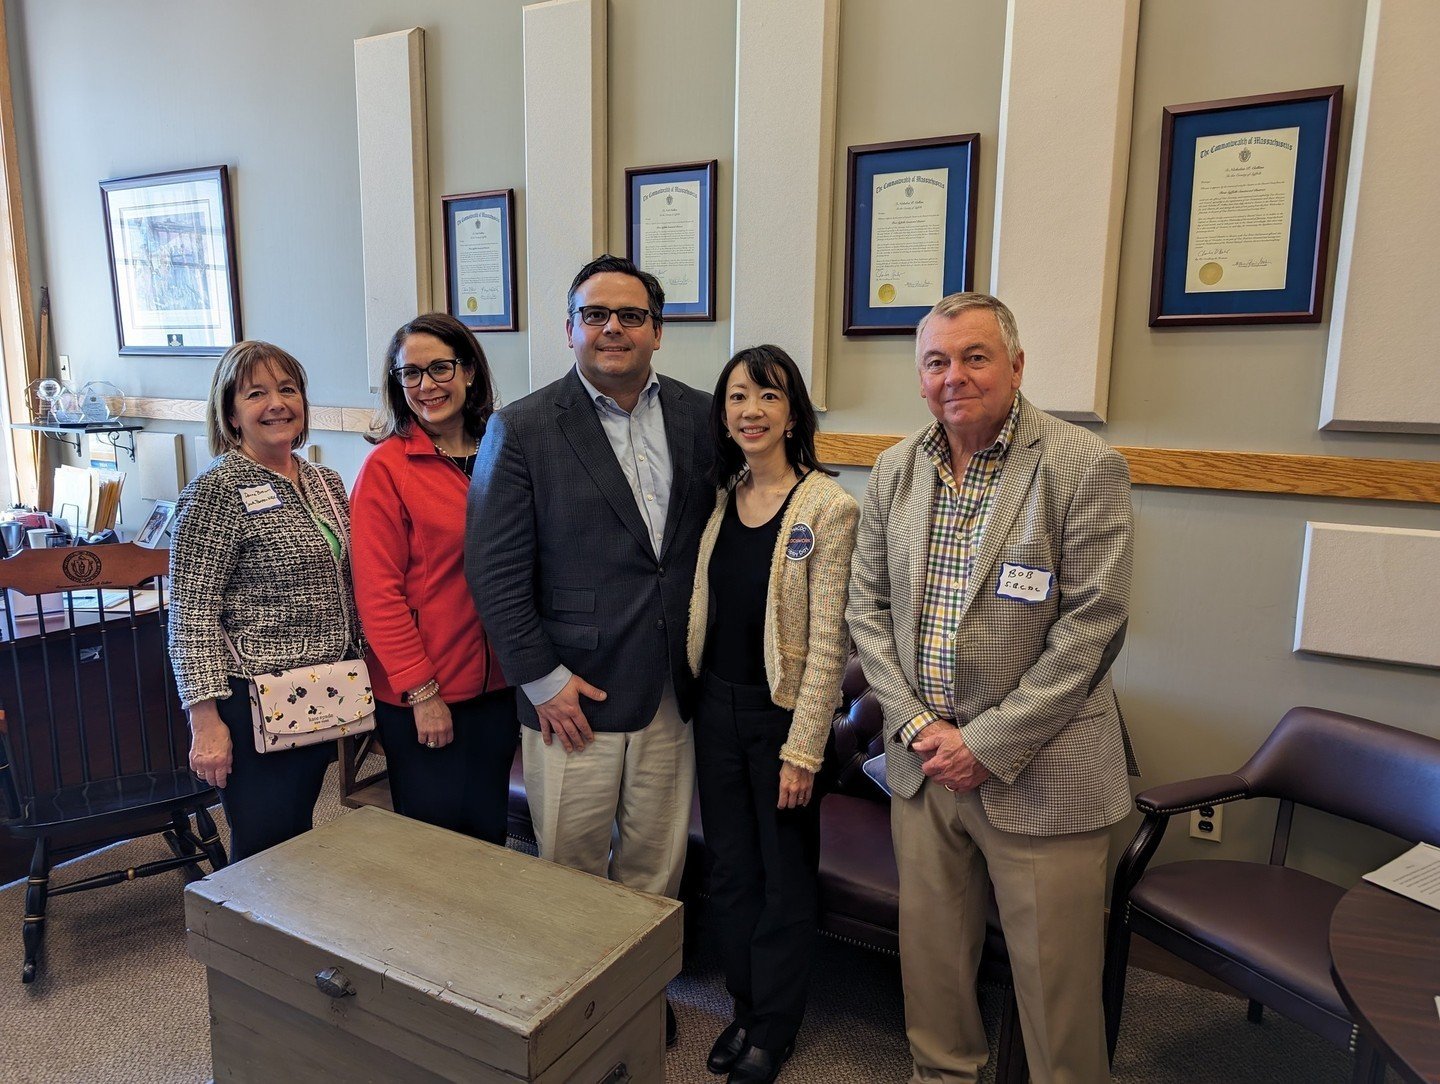 🗣️ On Monday, ACDC participated in MACDC Lobby Day!⁠
⁠
🤝 We met with Senator Nick Collins (@nickcollinsma) along with South Boston NDC (@southbostonndc) and Inquilinos Boricuas En Acci&oacute;n (@ibaboston), and advocated for the passage of the Aff